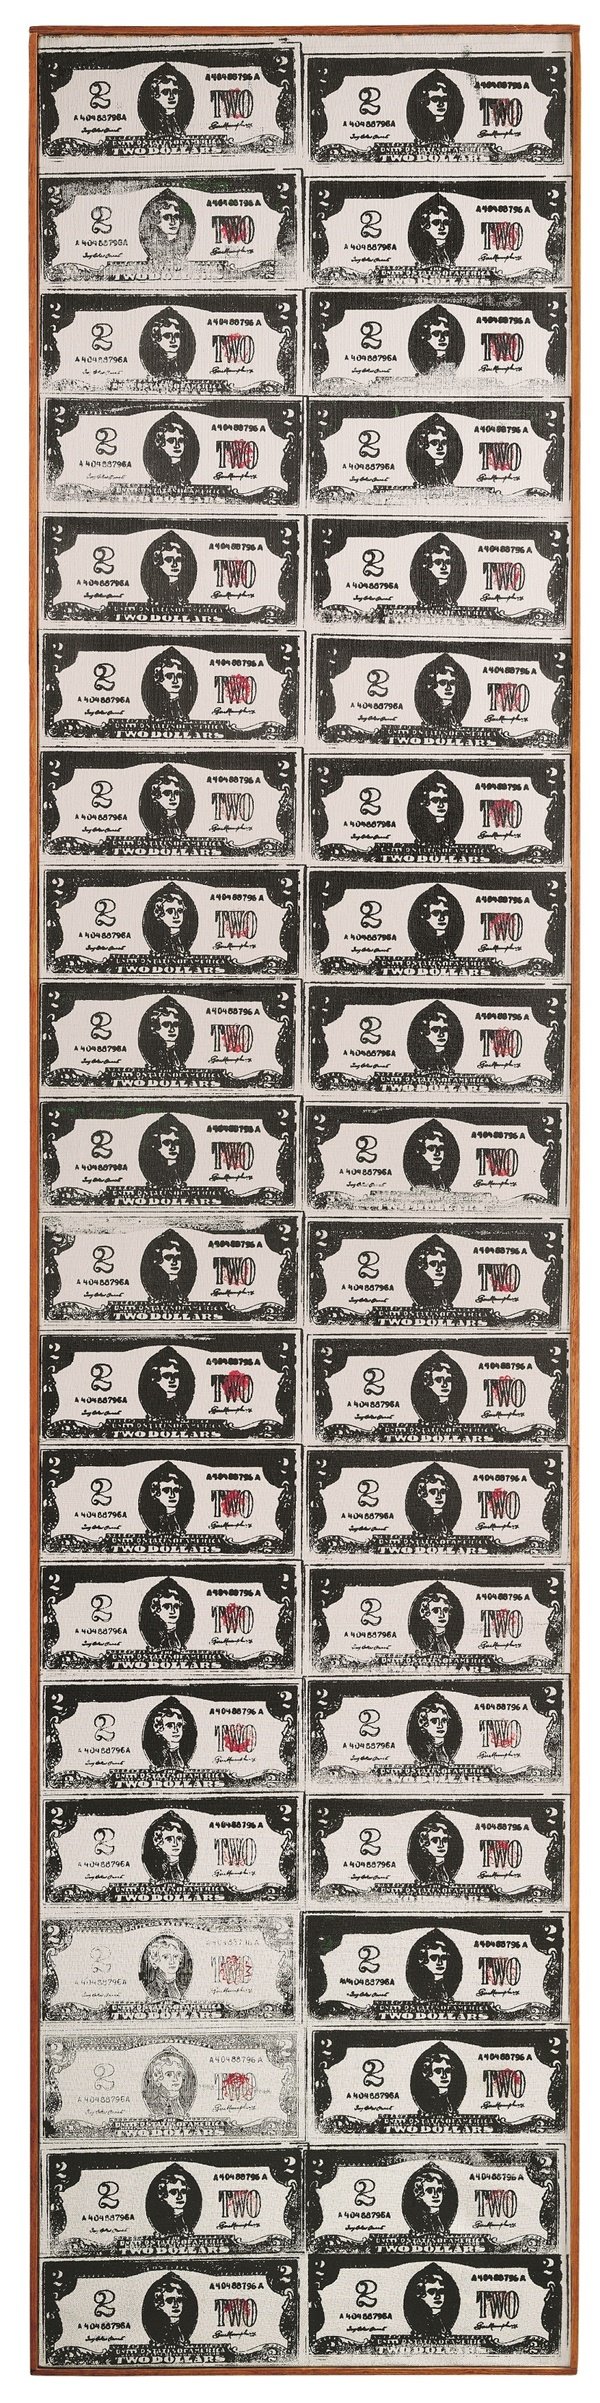 Andy Warhol, Two Dollar Bills (Fronts) [40 Two Dollar Bills in red] (1962). Courtesy of Christie's Images Ltd. 